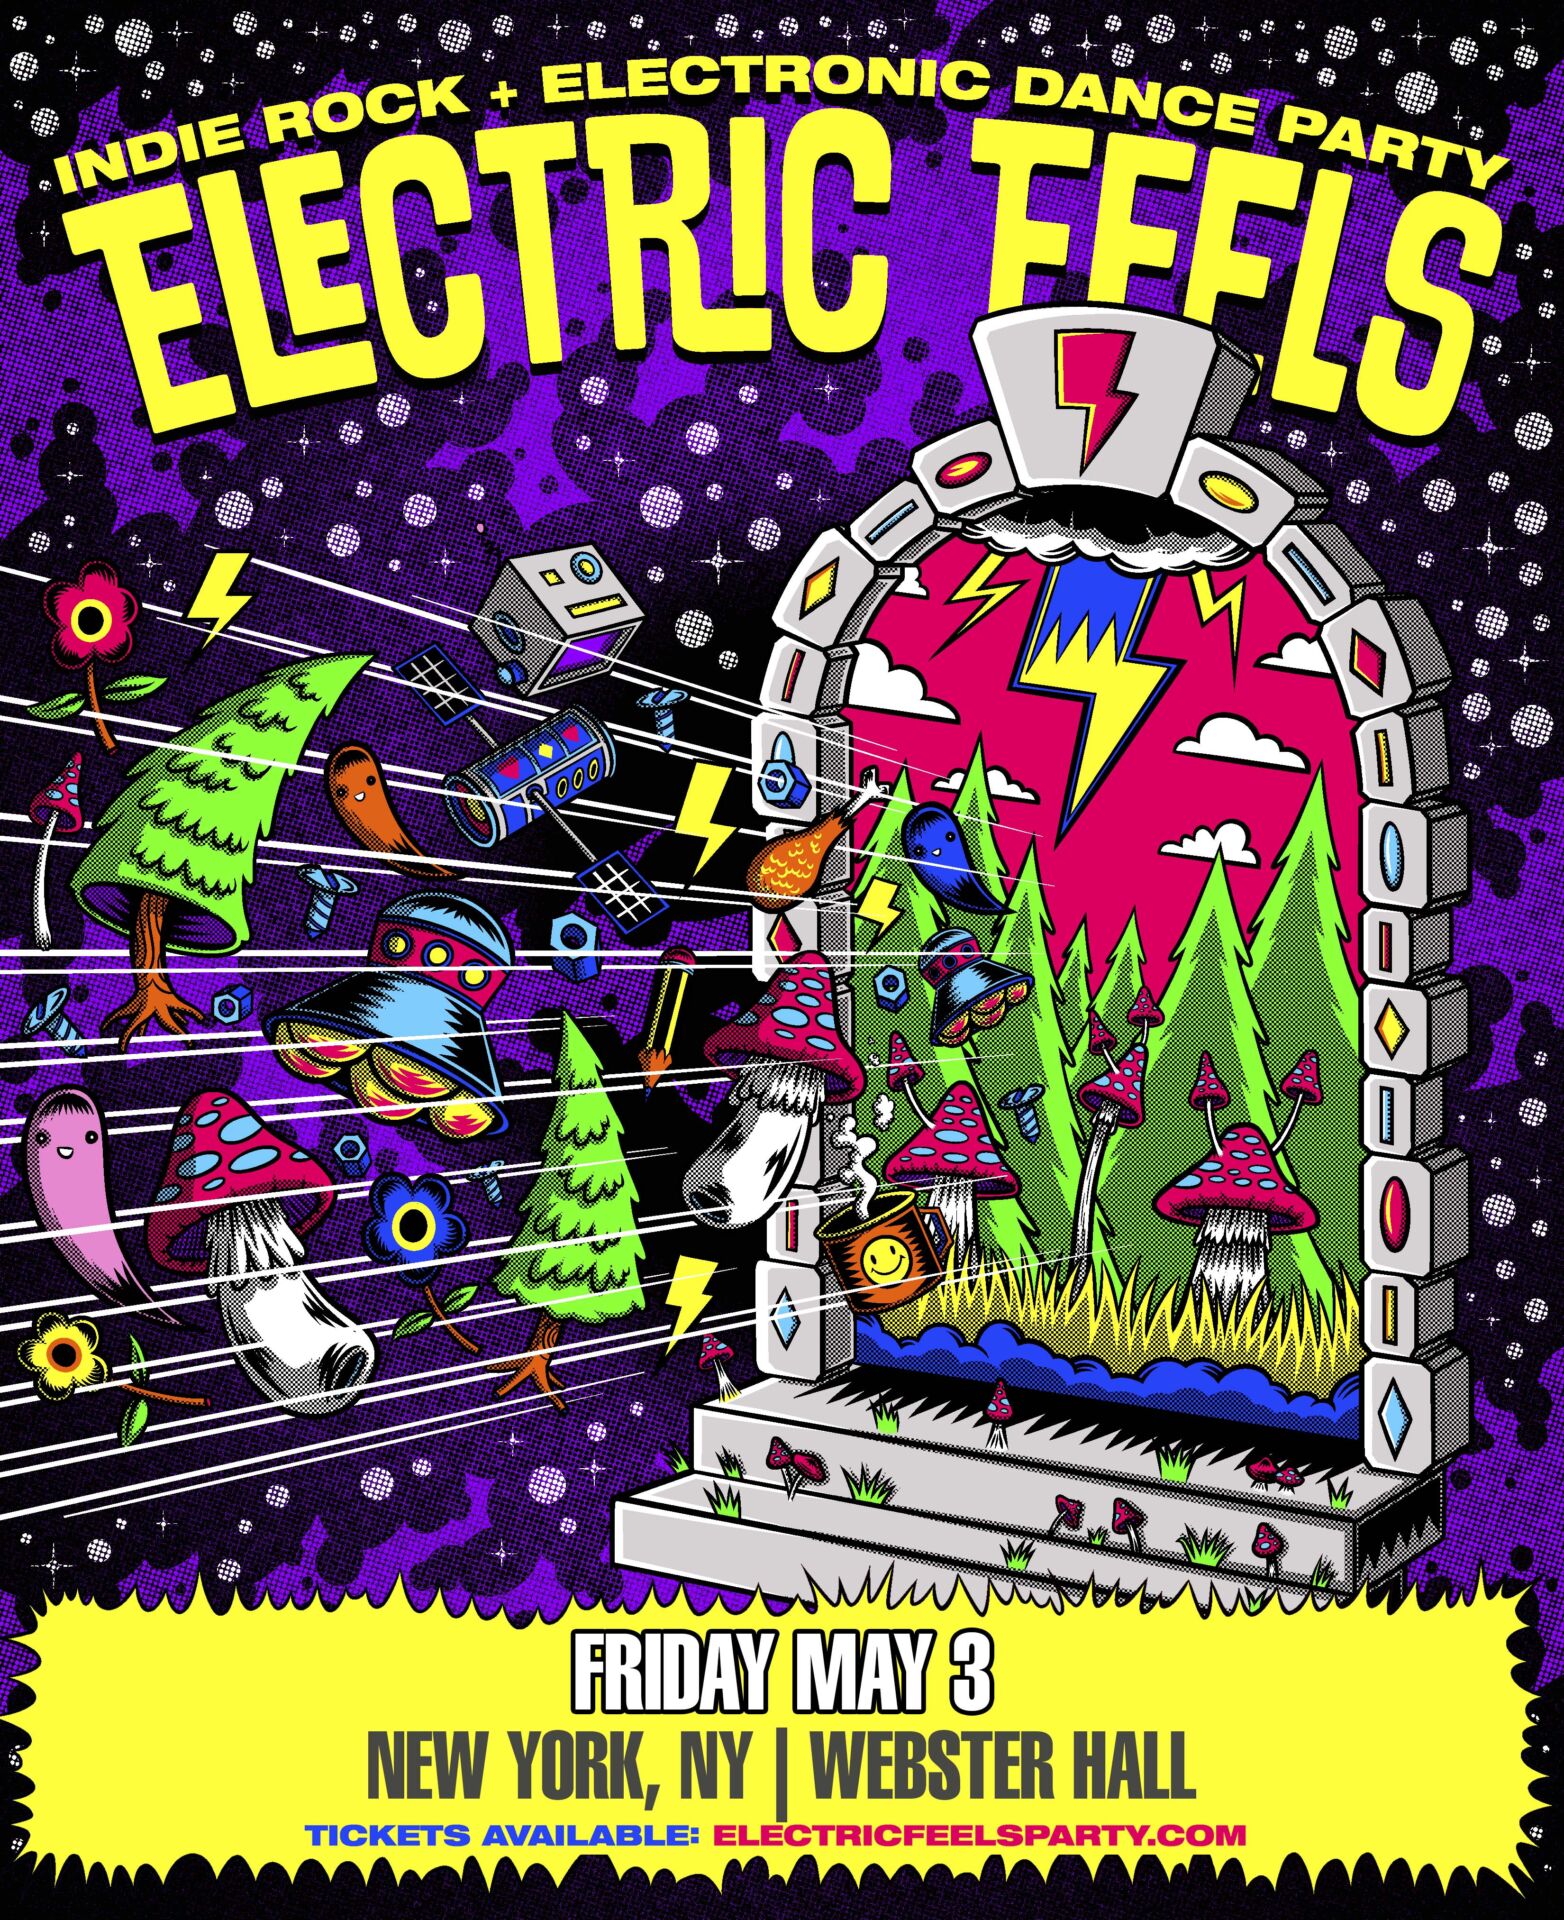 Electric Feels at Webster Hall